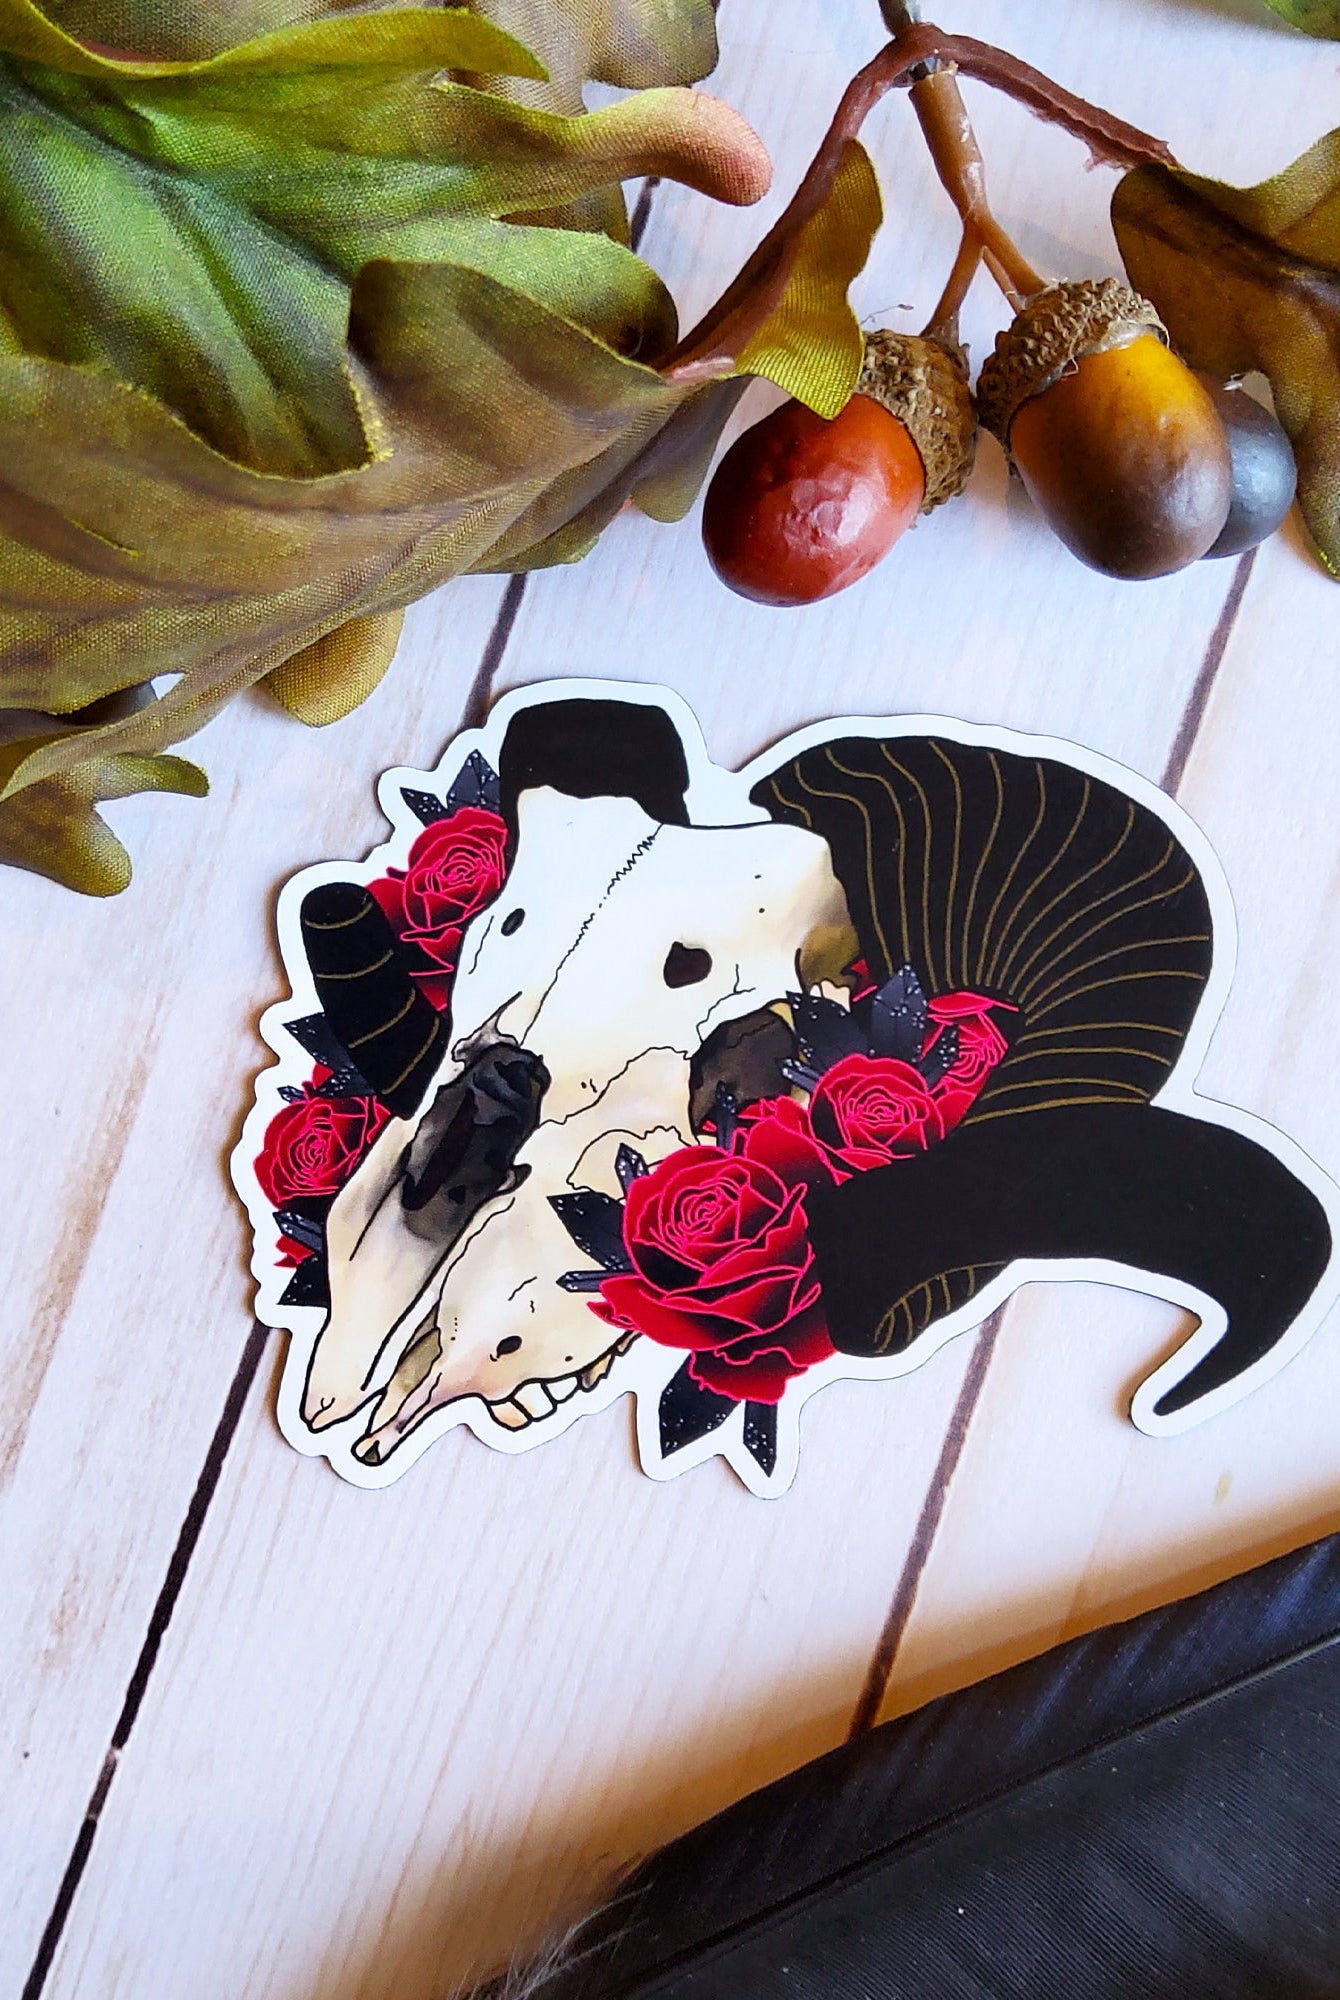 MAGNET: Ram Skull and Red Roses Decorative , Ram Skull Magnet , Skull and Roses Magnet , Skull Magnet , Skull Art Decorative Magnet